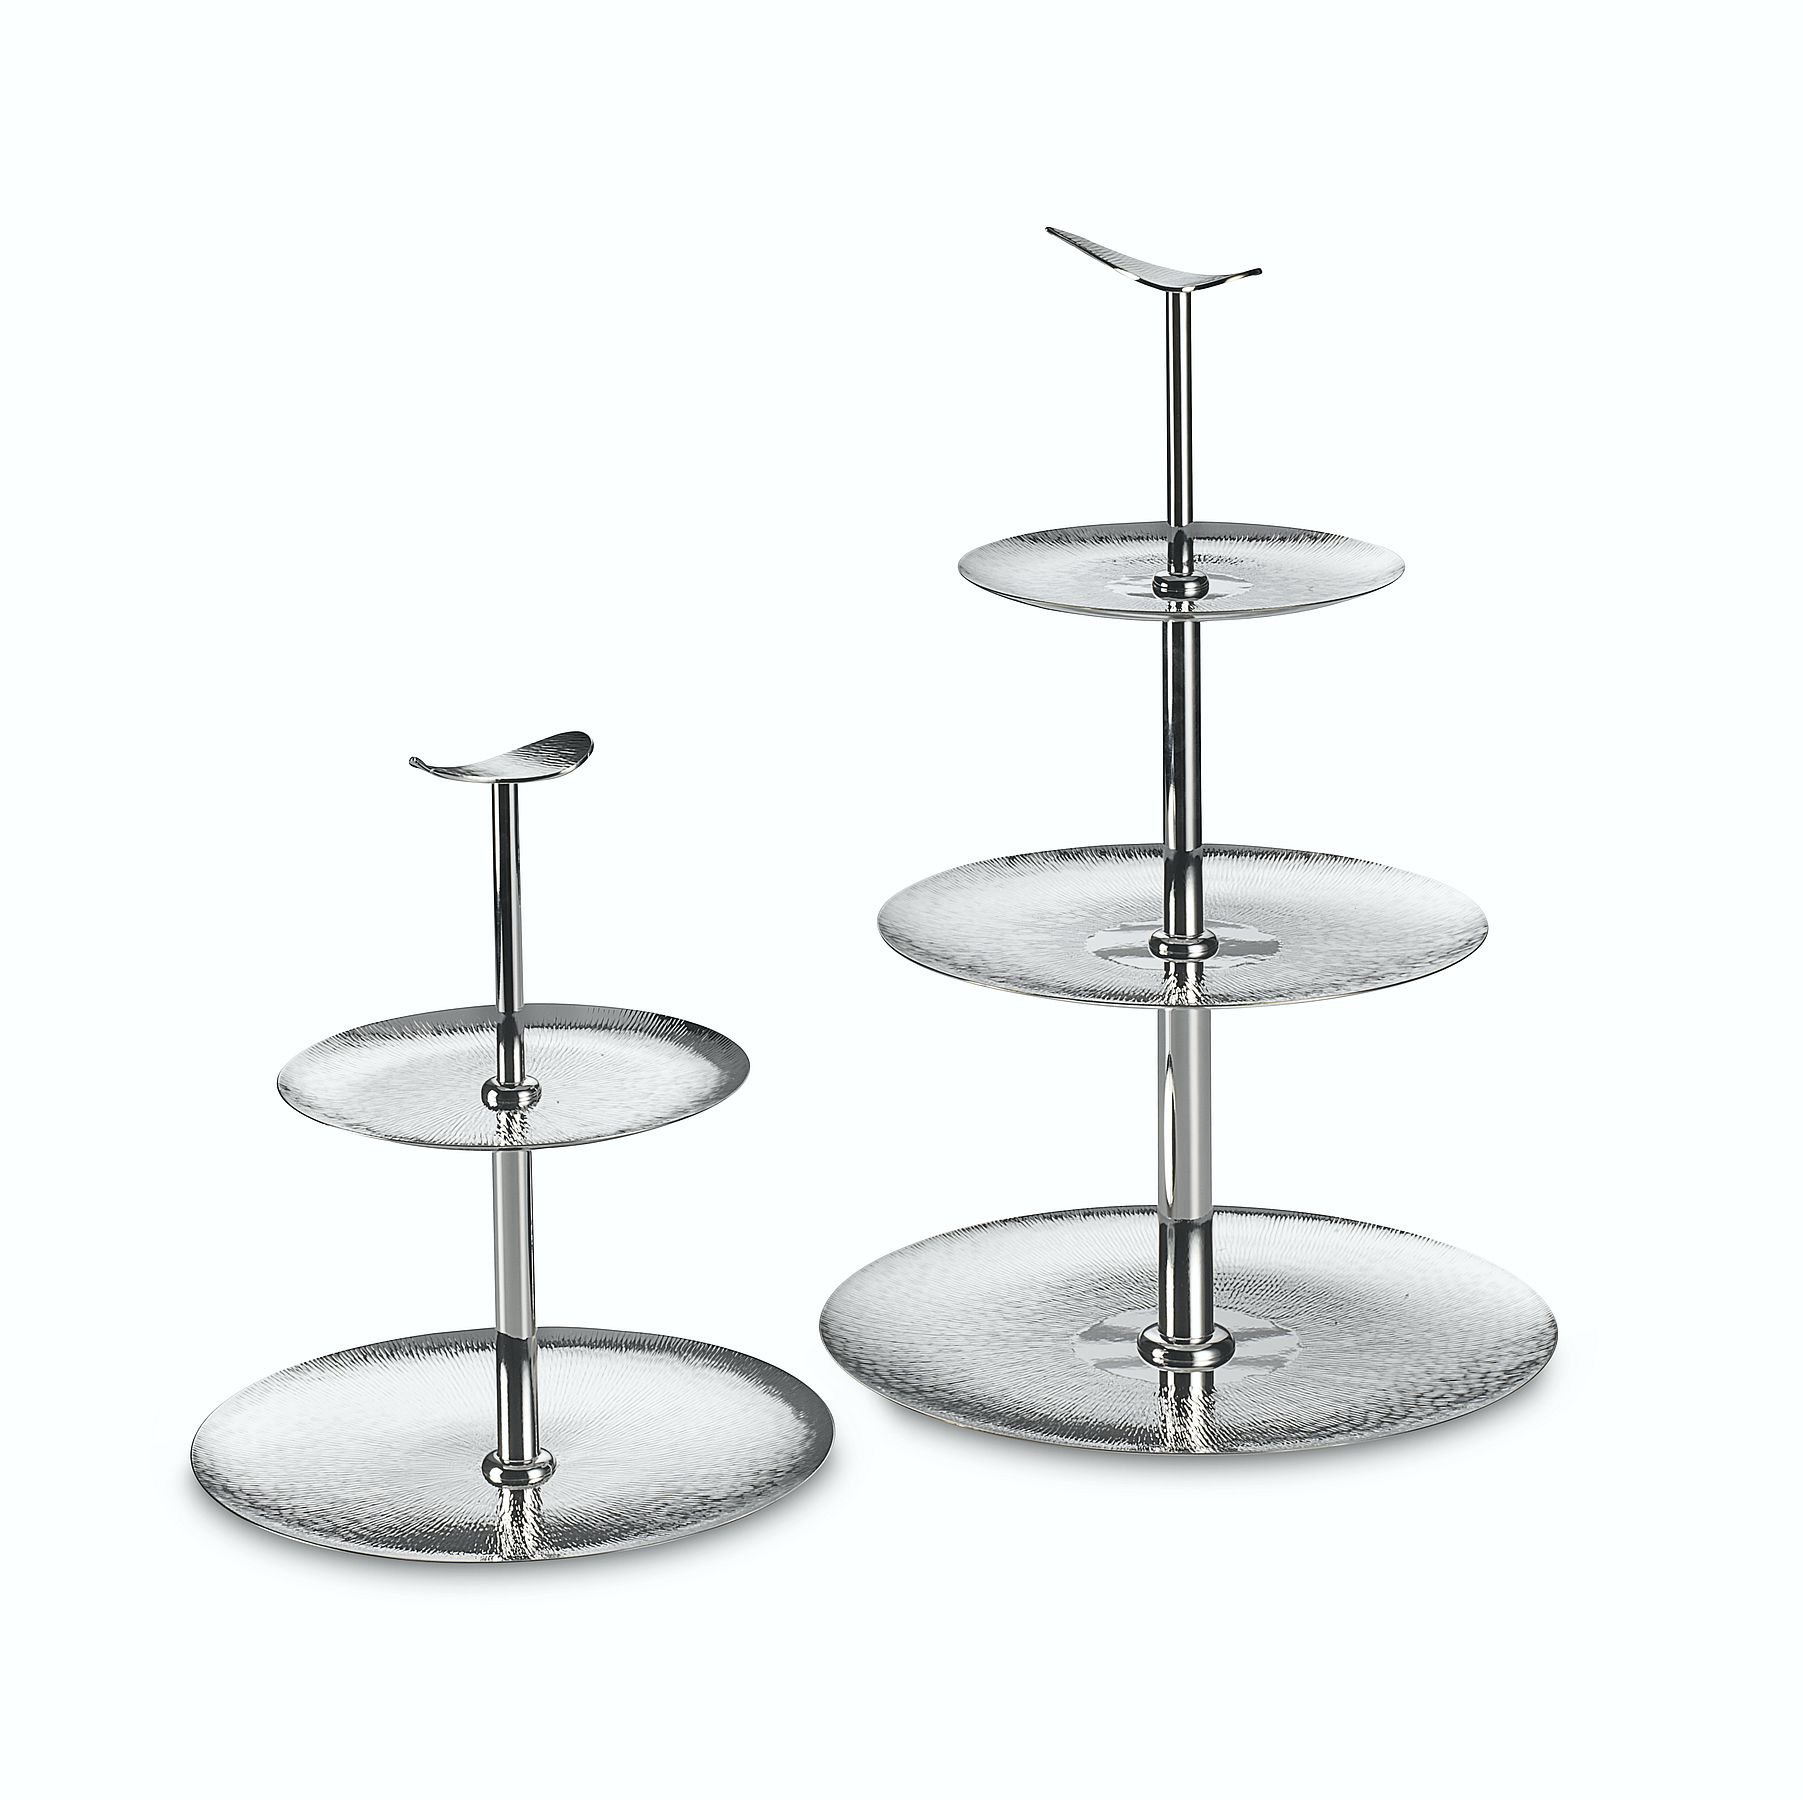 Silver cake stands